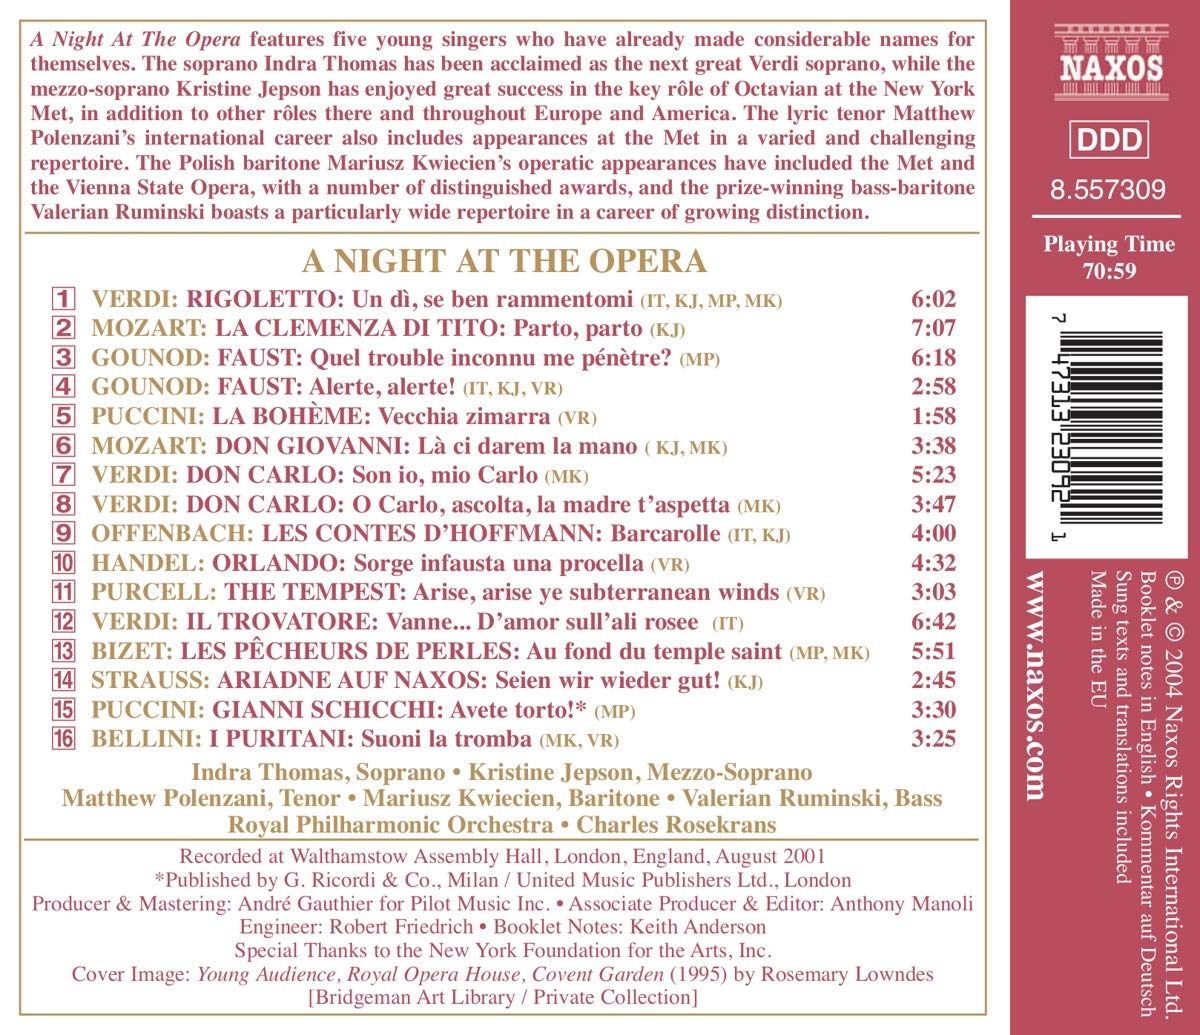 A NIGHT AT THE OPERA: Royal Philharmonic Orchestra, Charles Rosekrans